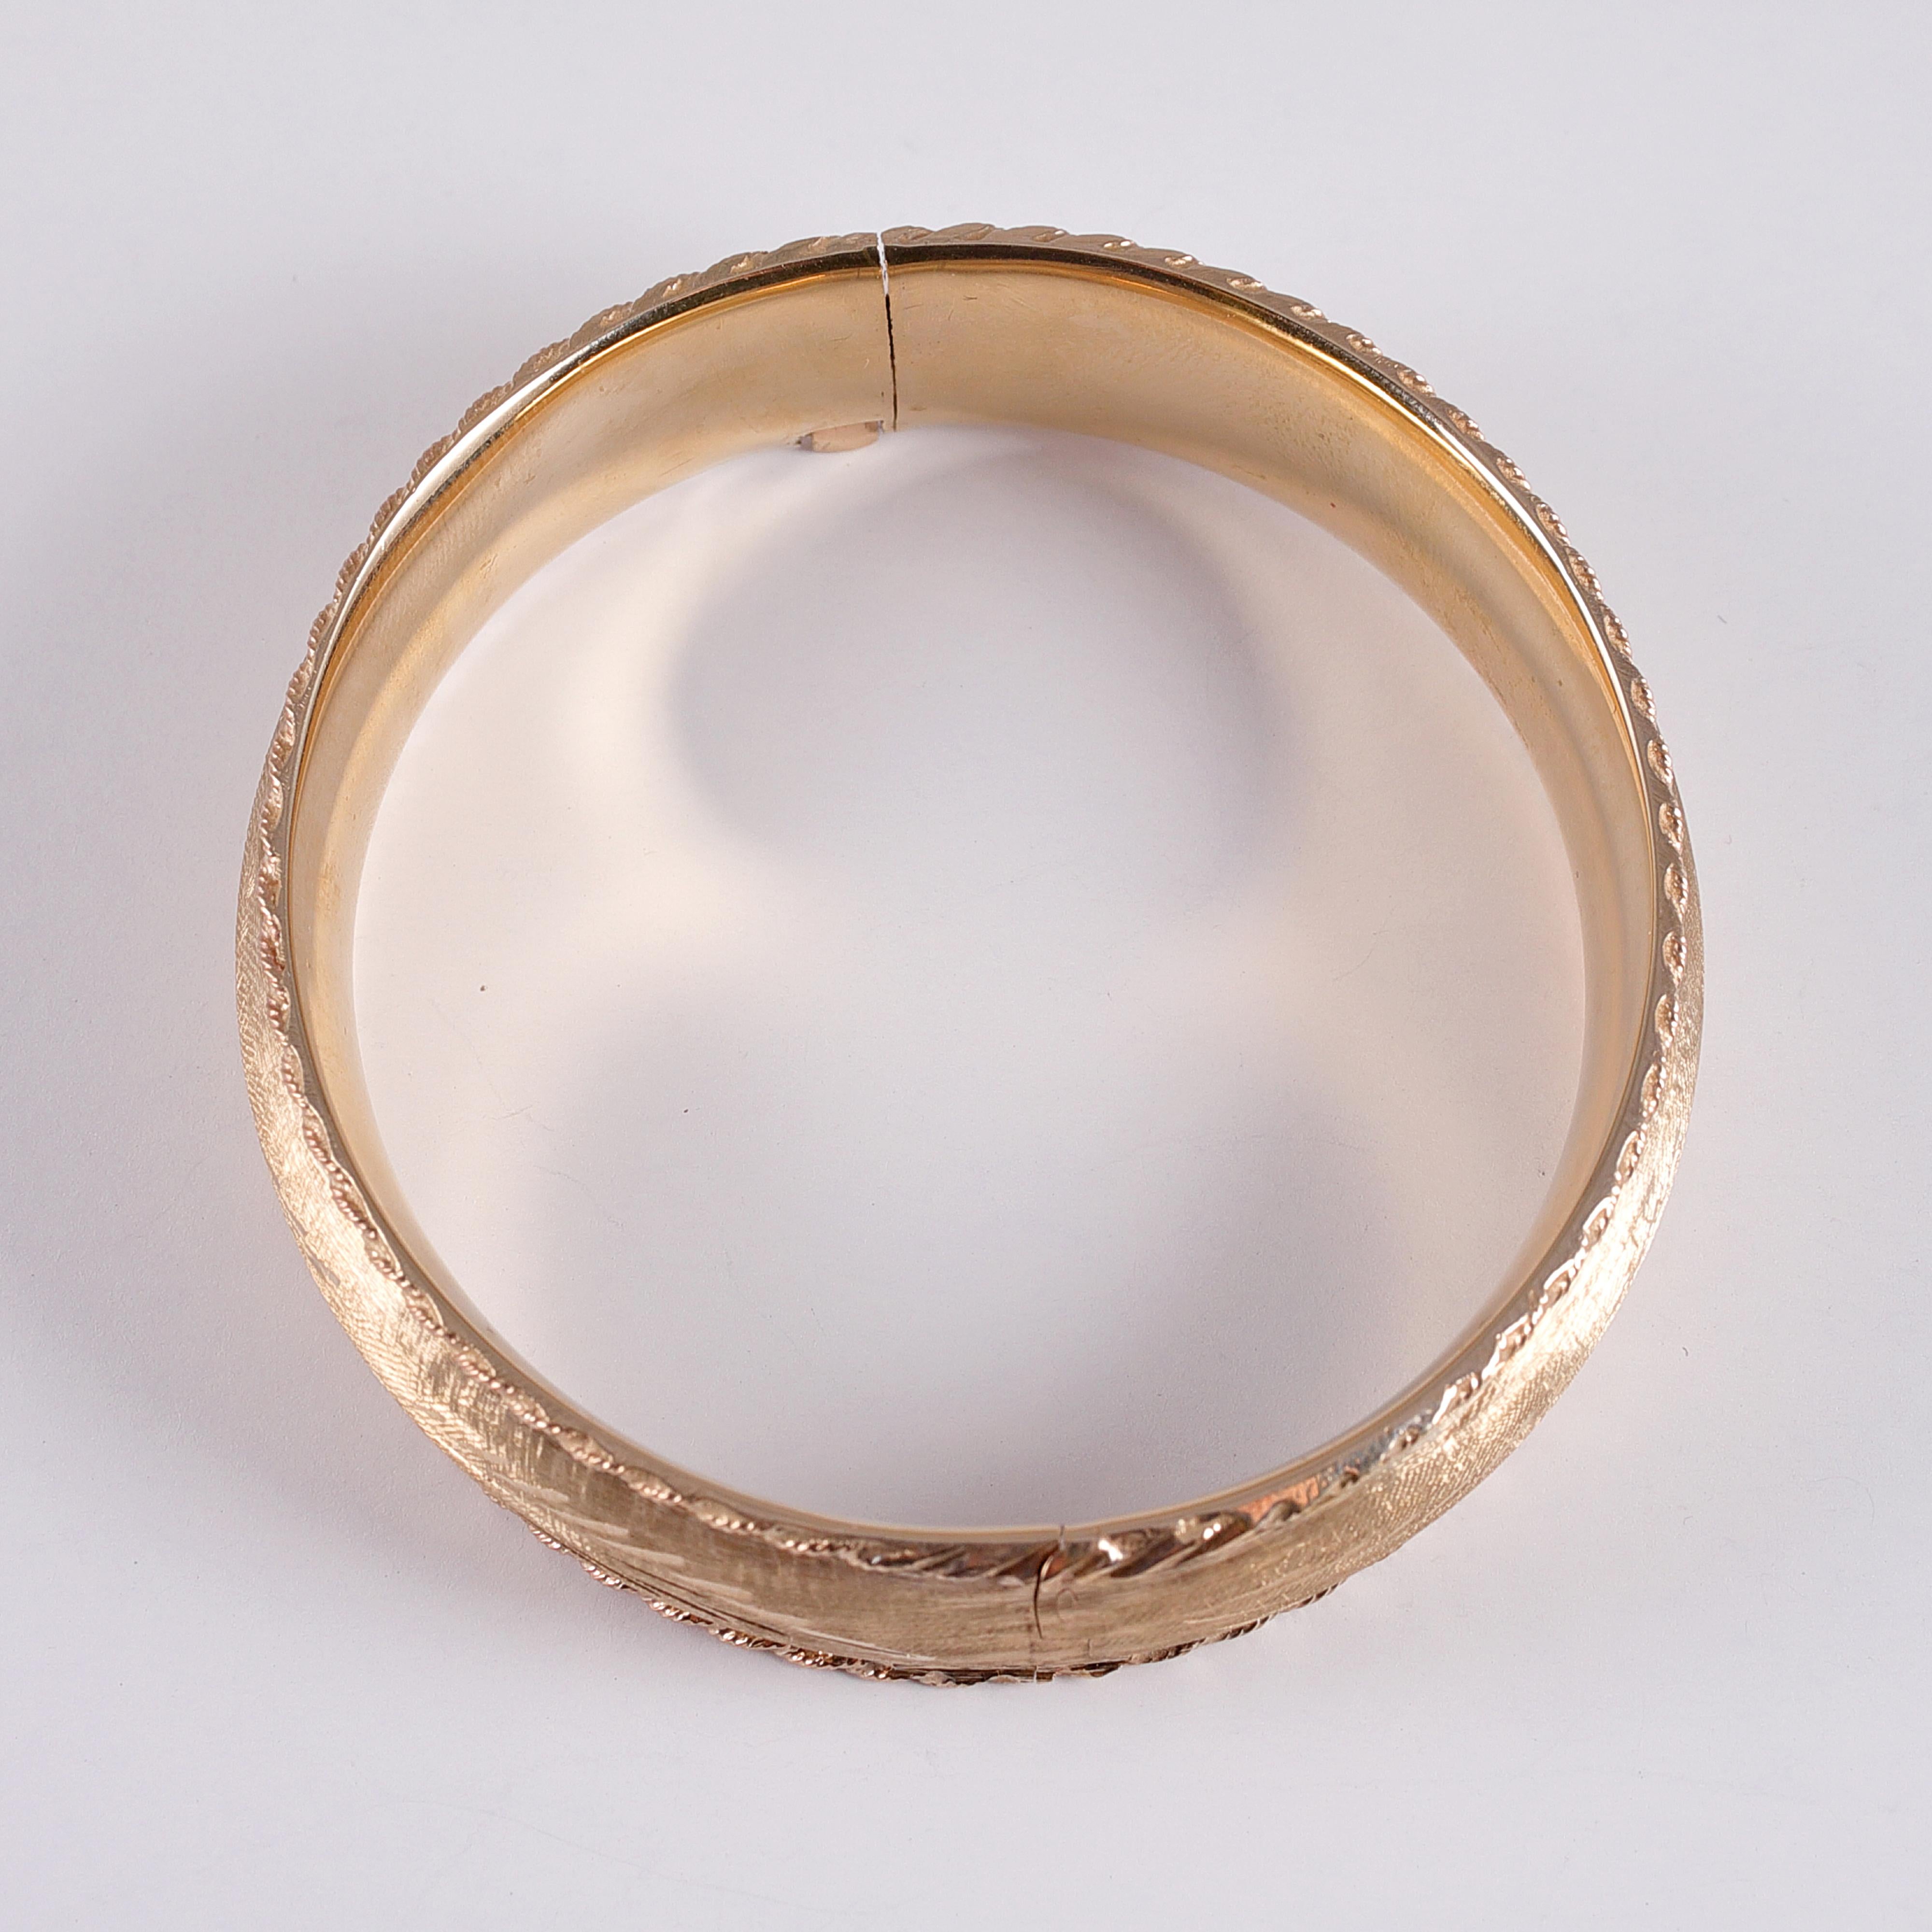 14 karat yellow gold brushed bangle with rope trim.  This hinged bangle looks great alone or stacked.